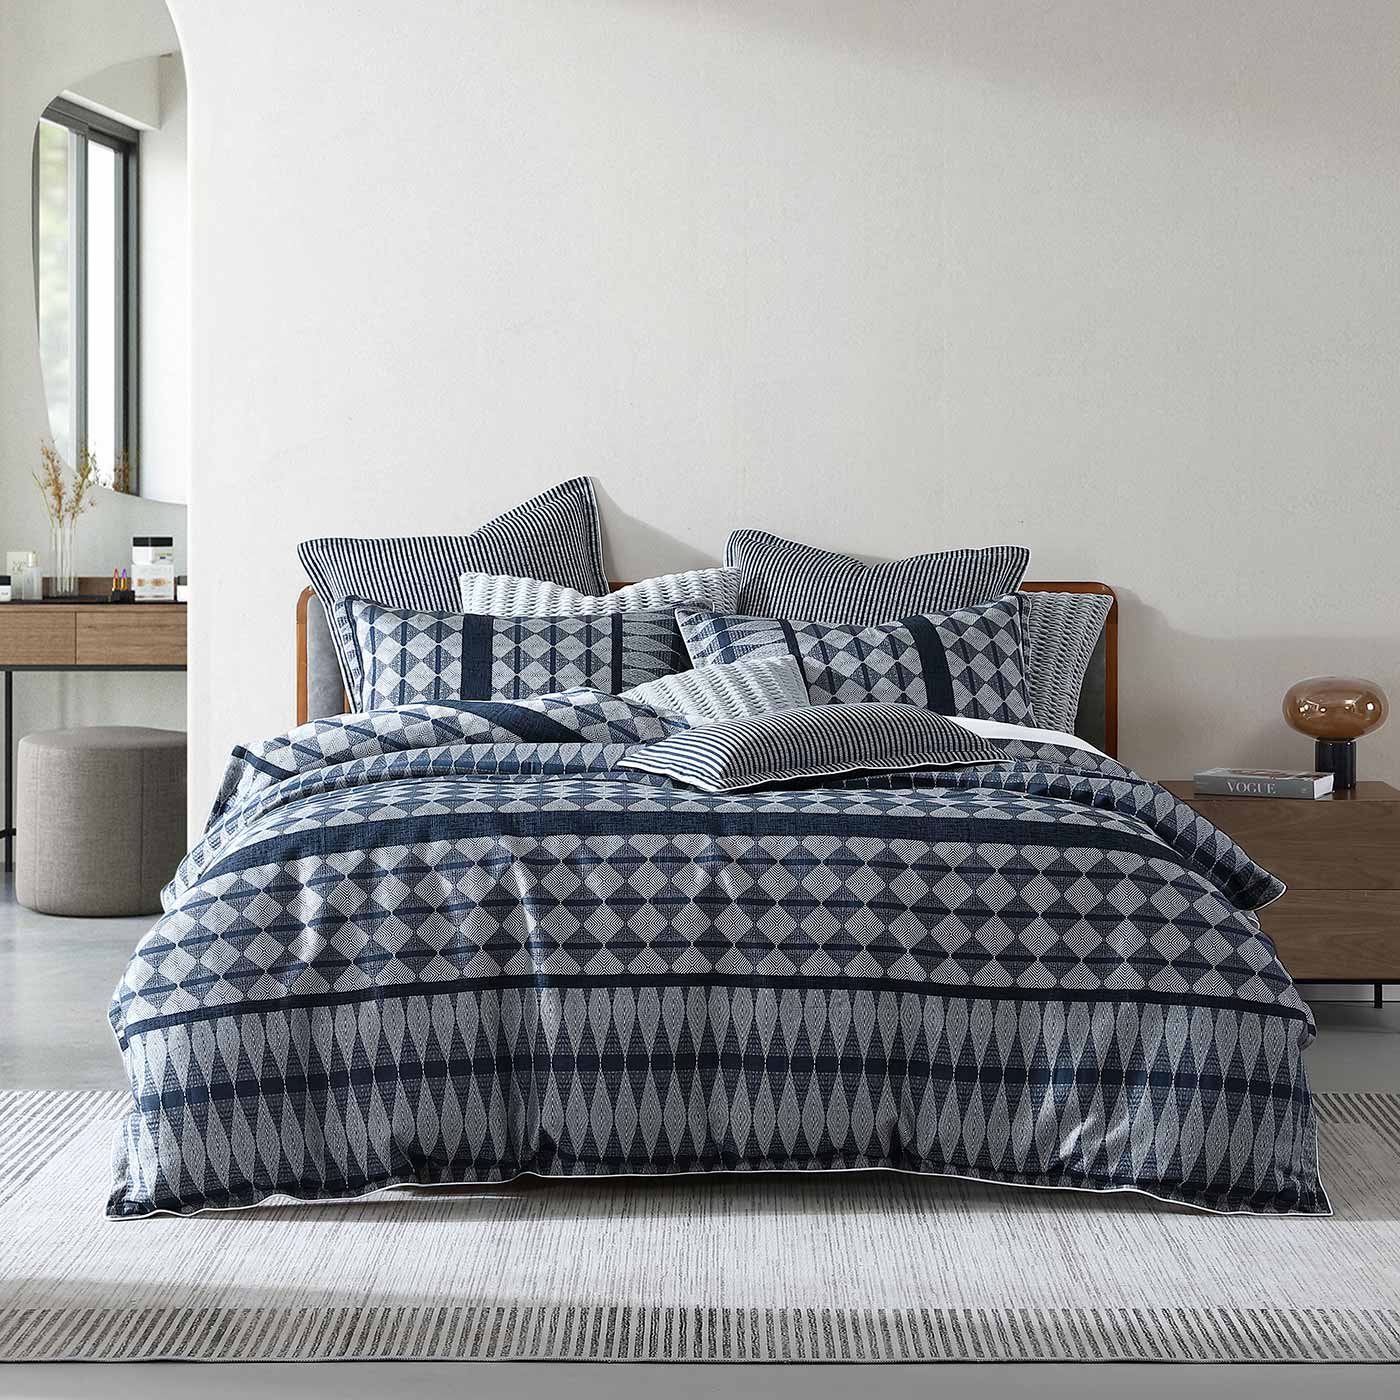 Classic stripes are woven with geometrics in this contemporary story. Boyd features industrial tones of slate blue and silver grey to create contrasting horizontal panels, the self-flange and cord piping giving a tailored finish.